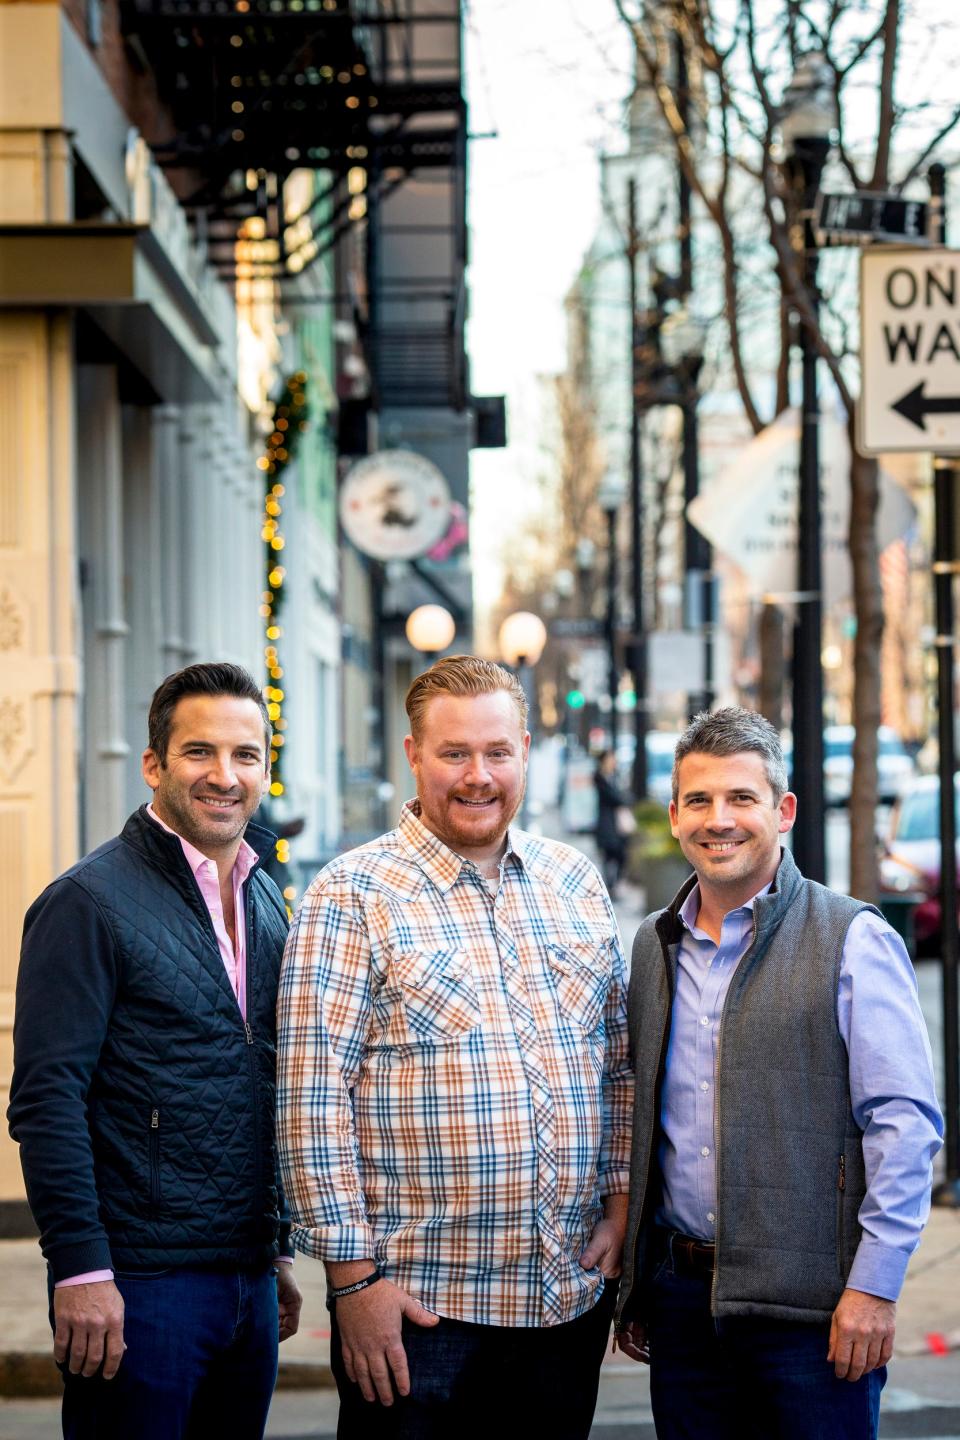 Thunderdome restaurant group co-founders/owners John Lanni, Alex Blust and Joe Lanni. Thunderdome is opening The Davidson on Fountain Square this November.